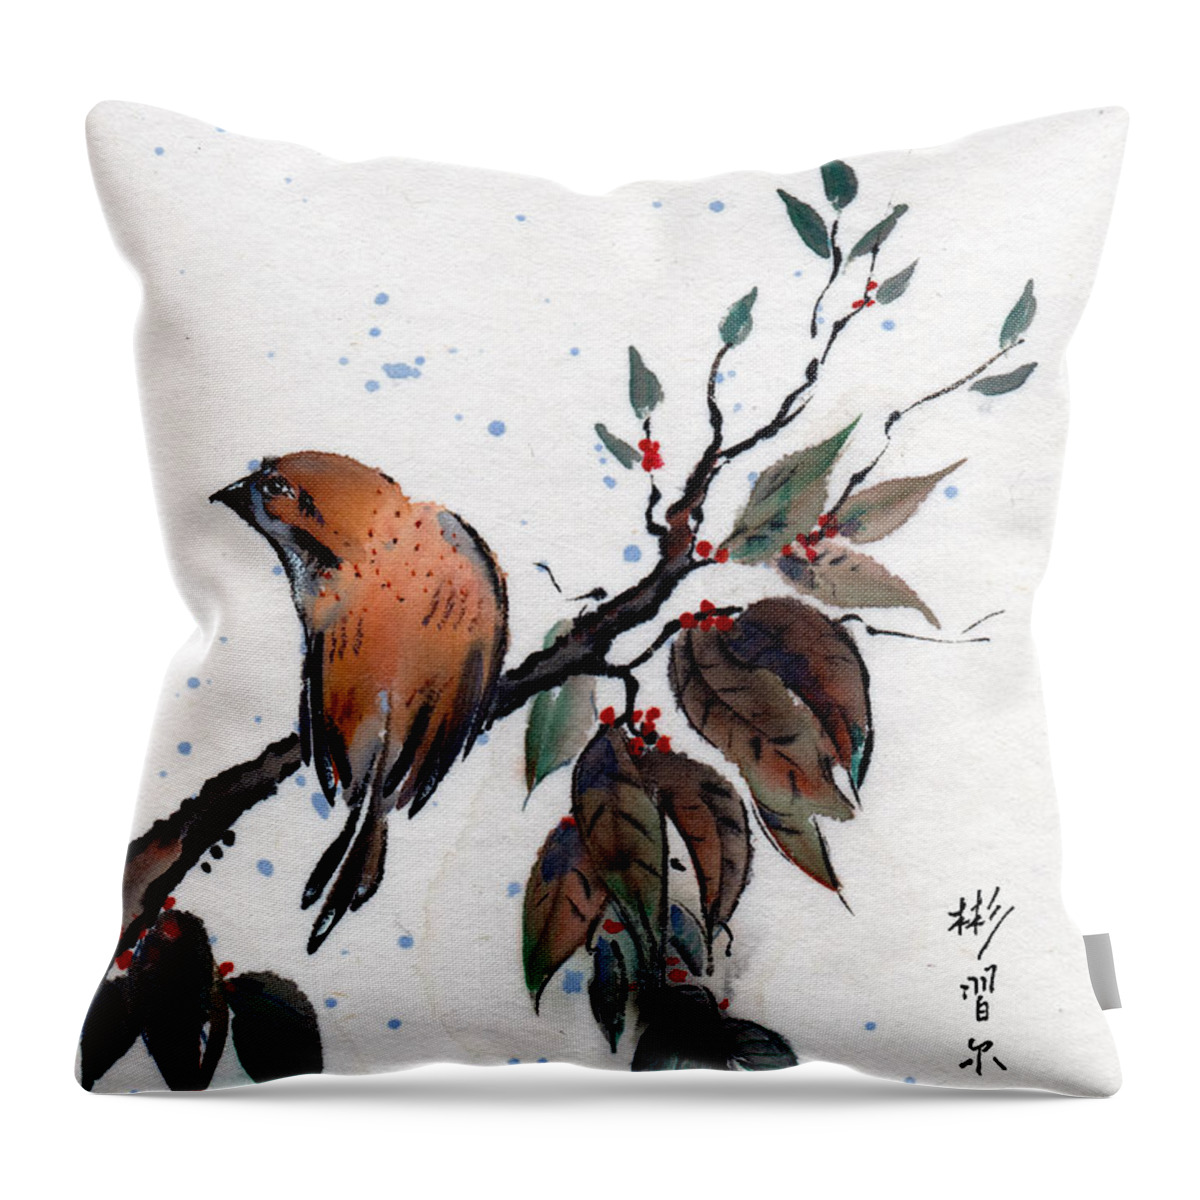 Chinese Brush Painting Throw Pillow featuring the painting Deliberation by Bill Searle